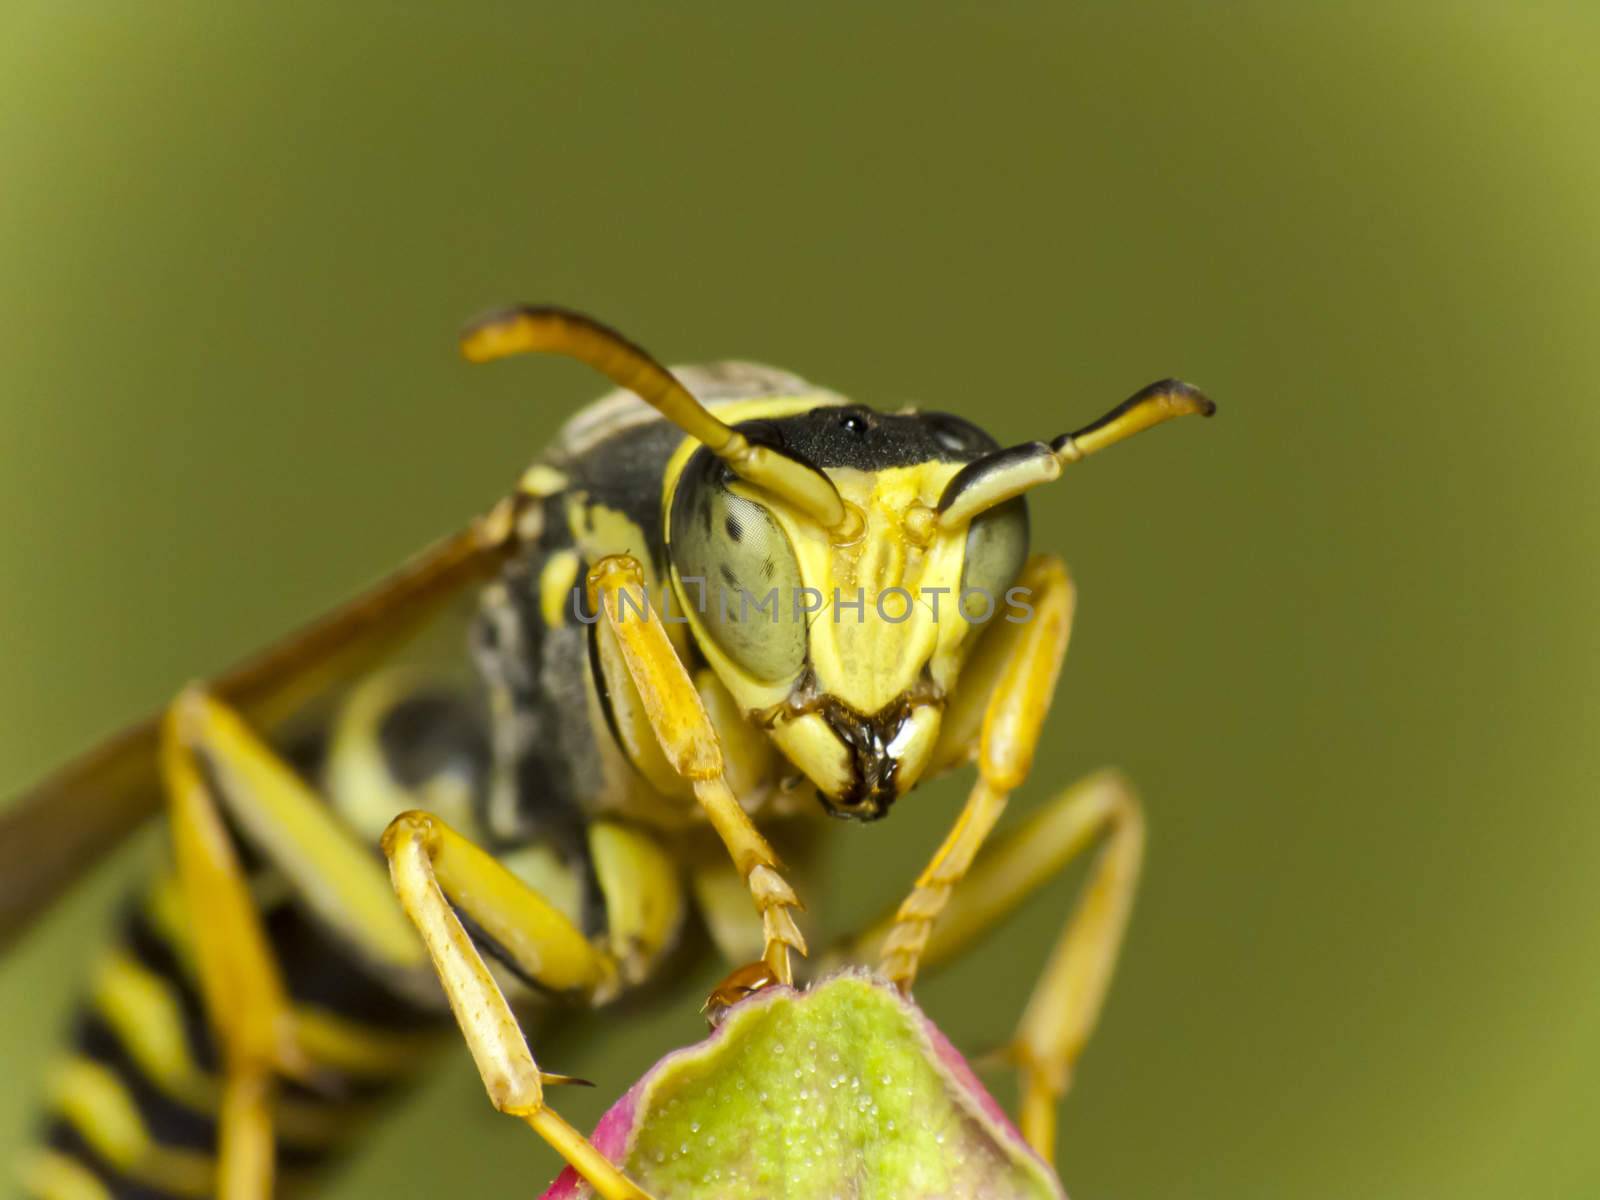 Potter wasp, Ancistrocerus species - close up